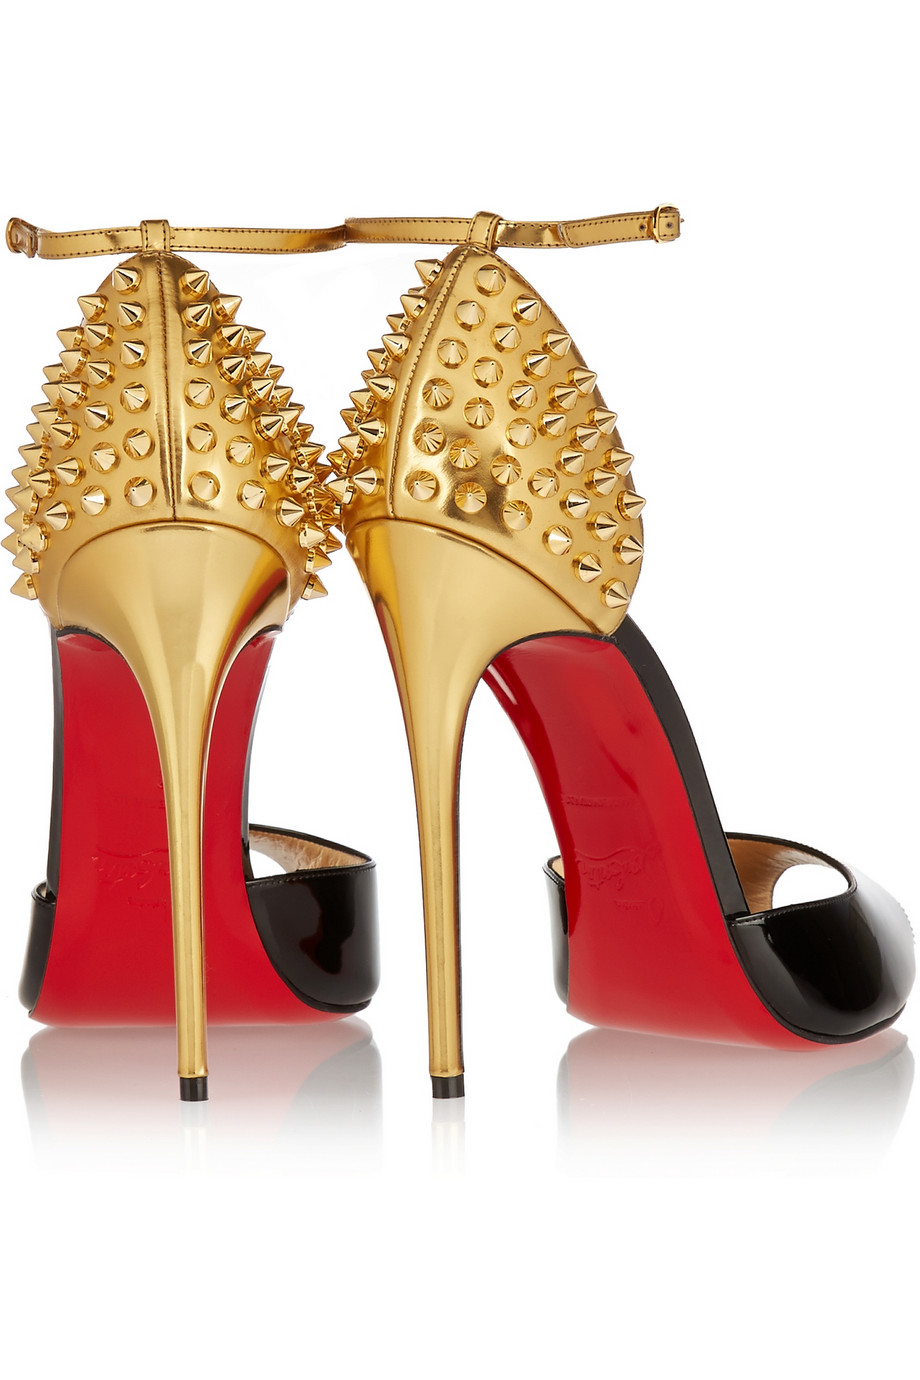 Christian Louboutin Pina Spike 120 Patentleather Pumps in Black - Lyst